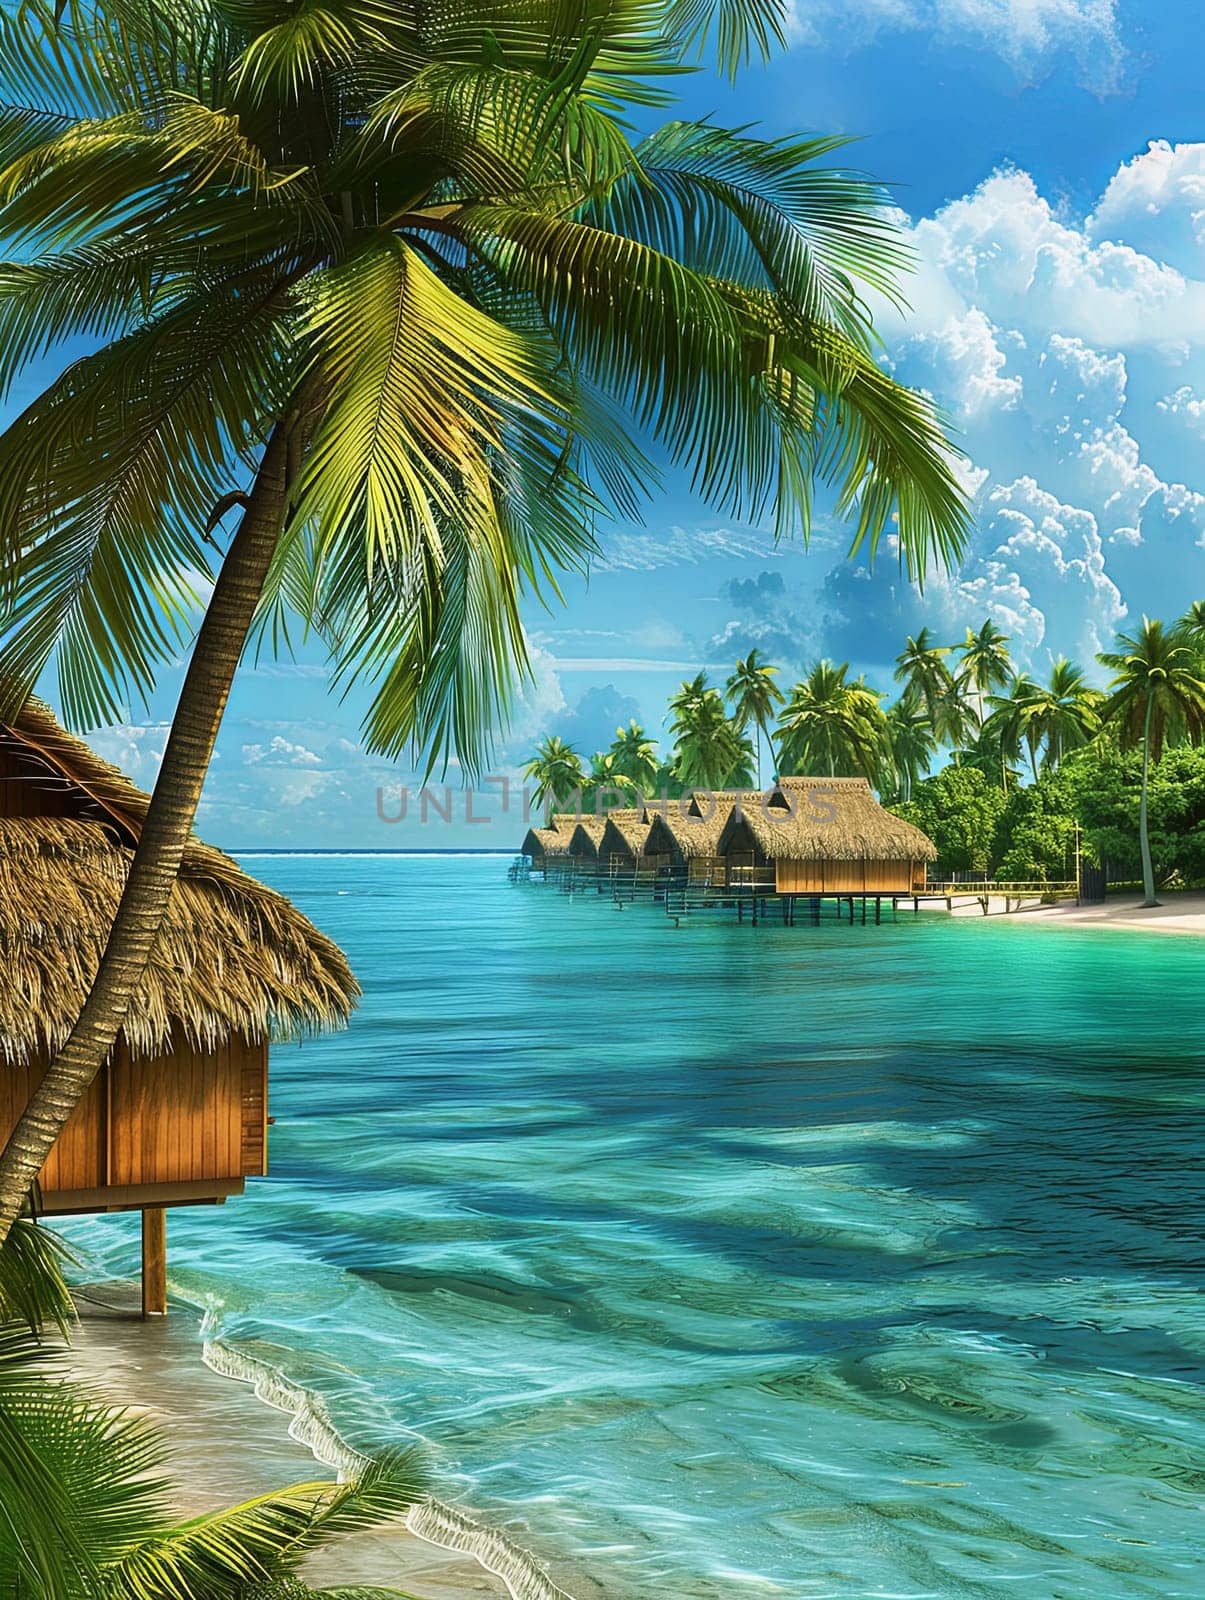 A painting depicting a tropical beach with palm trees, highlighting the azure sea and island life with beachfront bungalows.